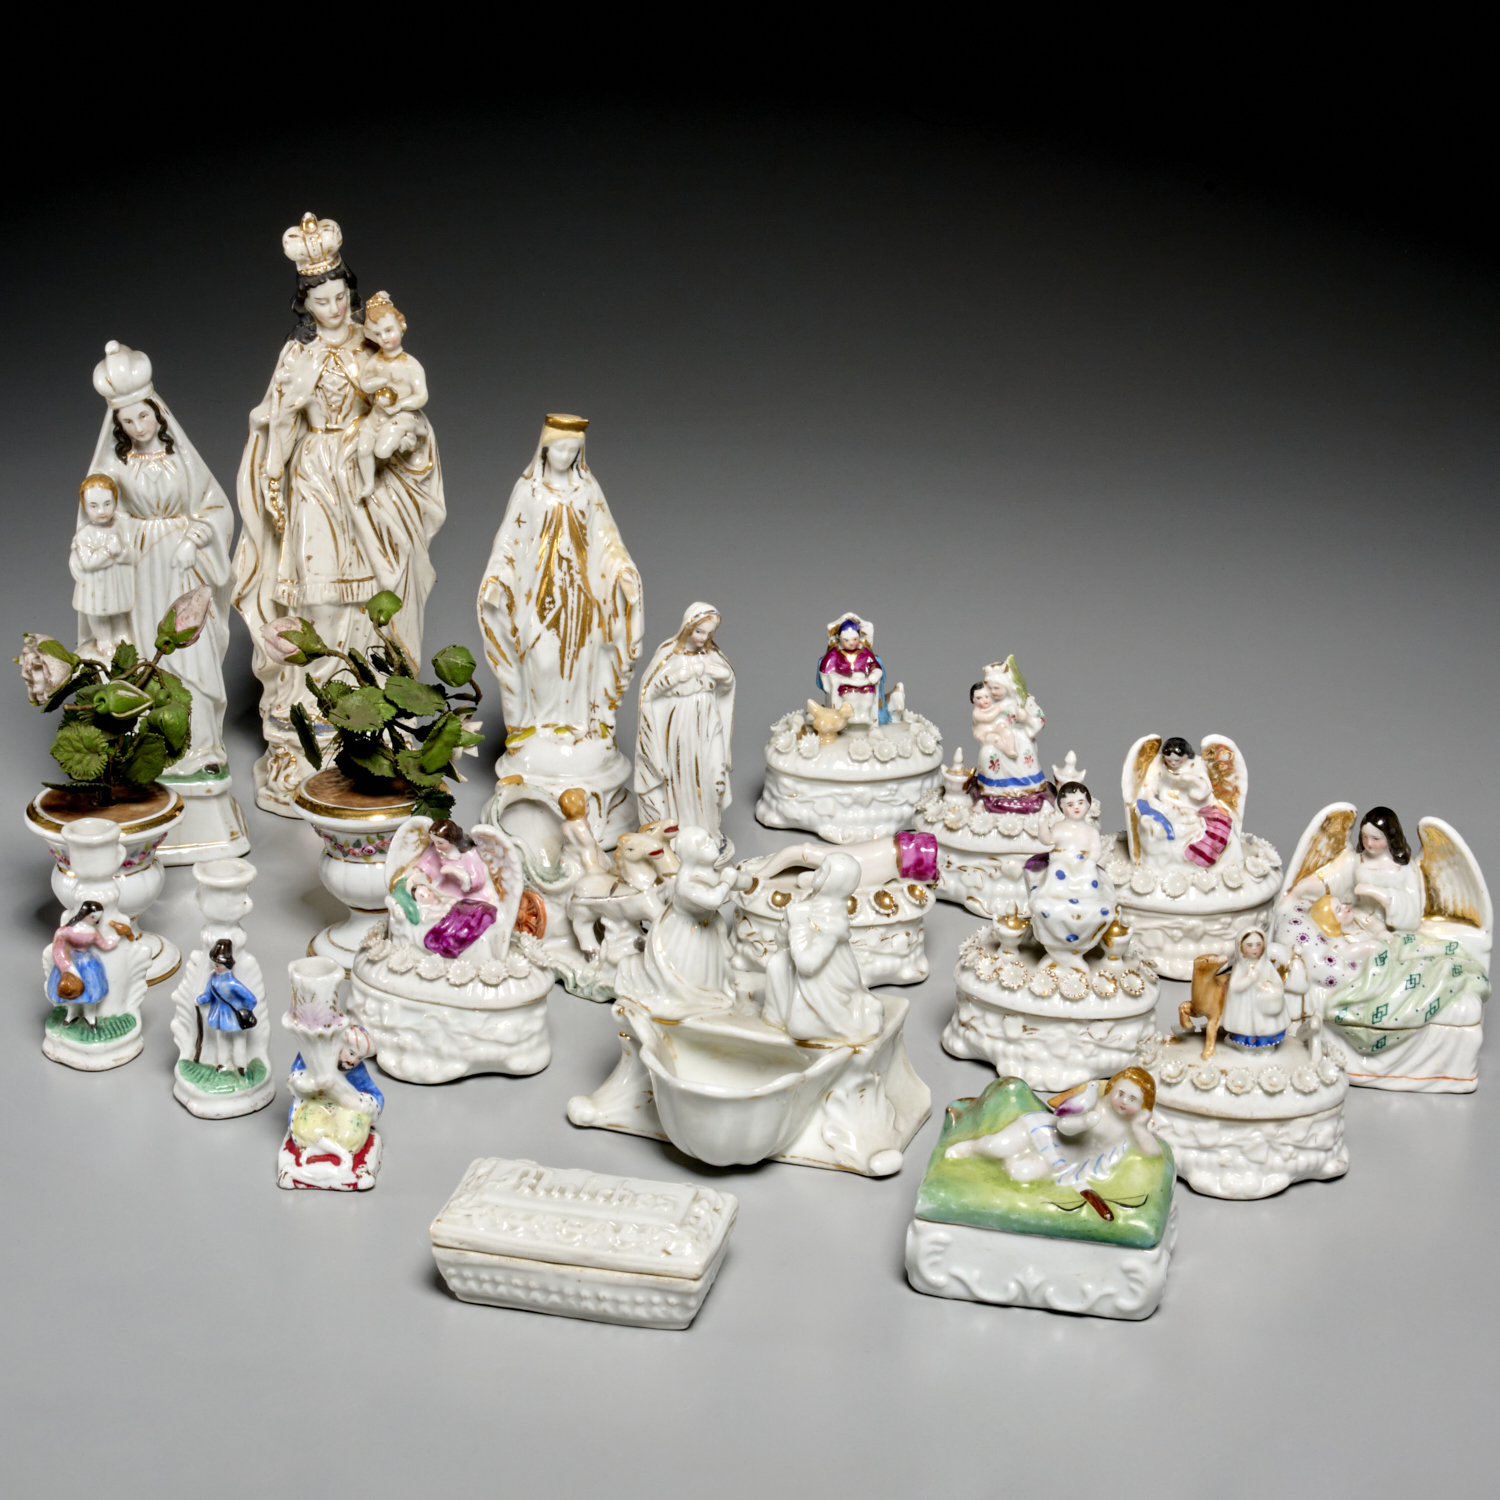 LARGE COLLECTION VICTORIAN FIGURINES 3ce564